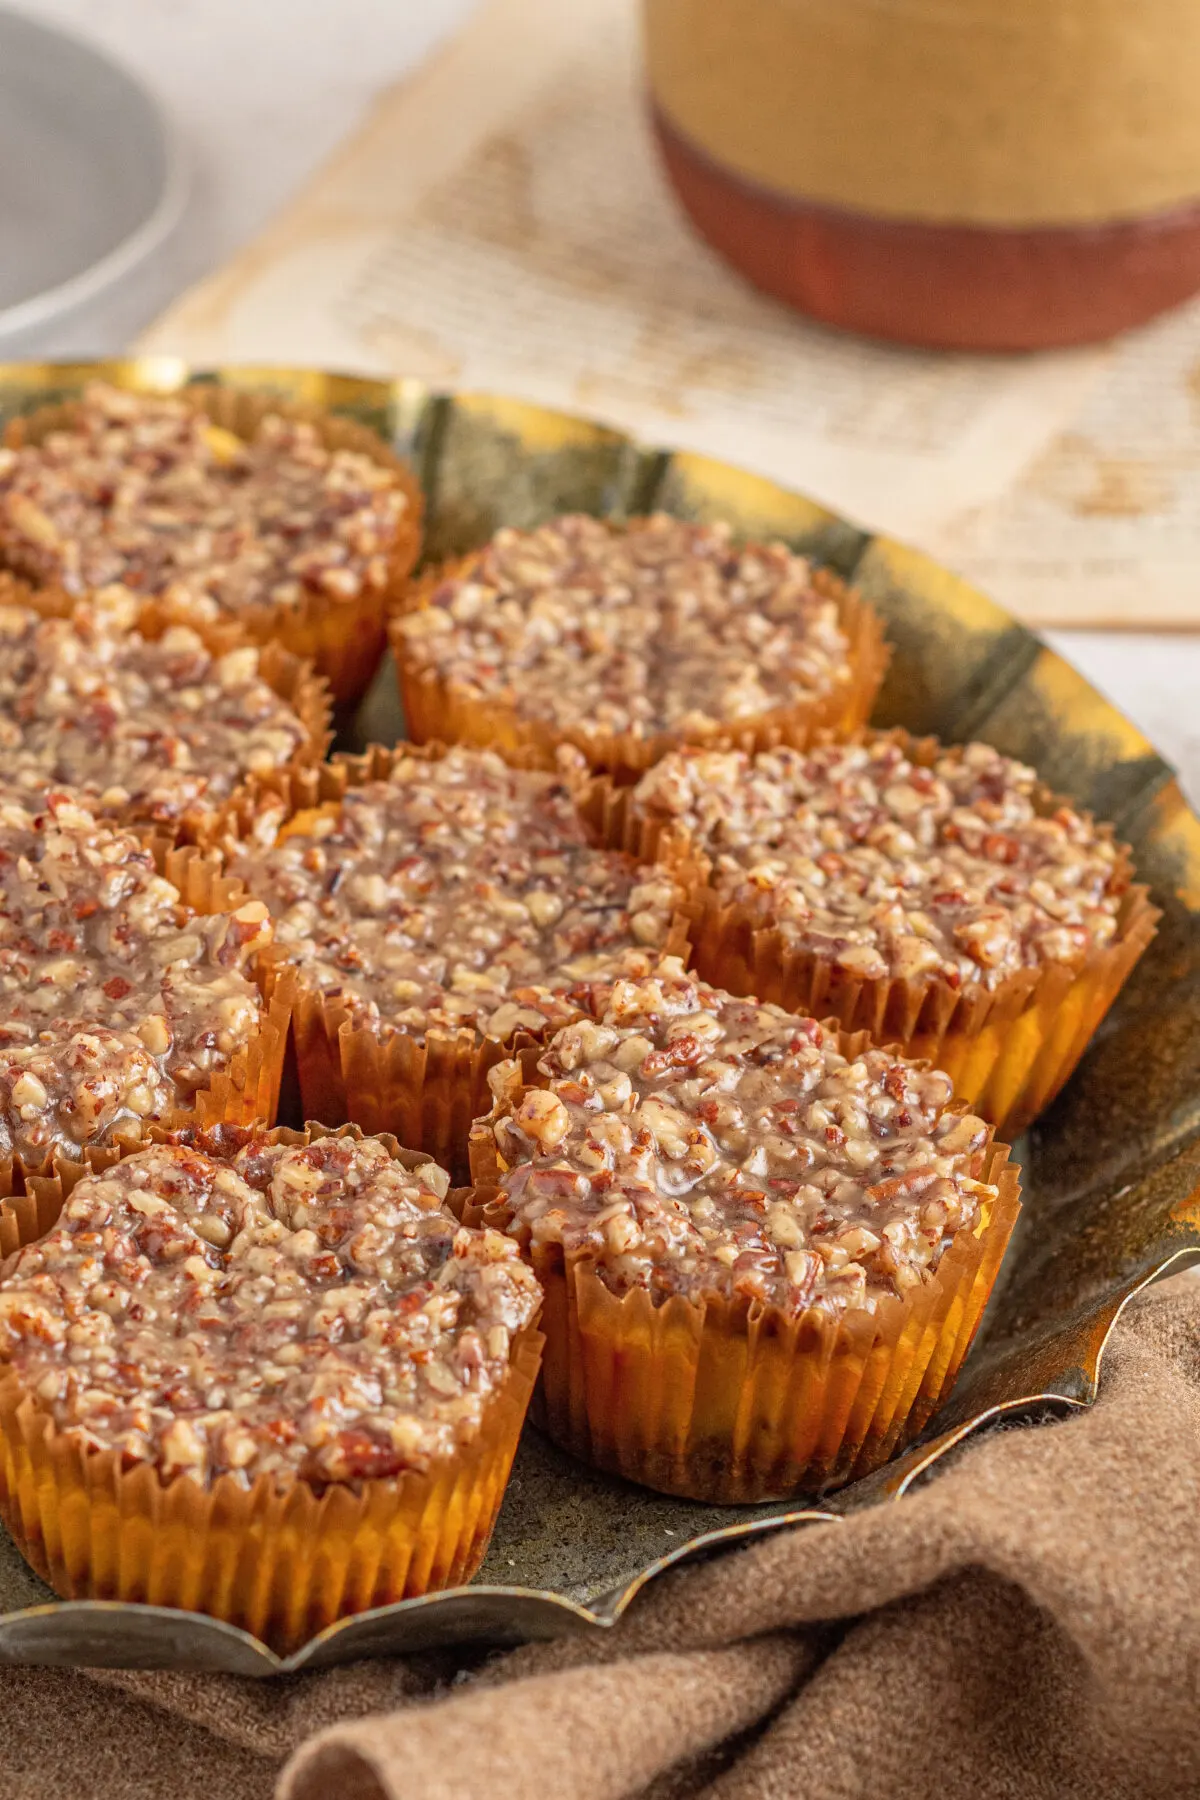 Indulge with mini pecan pie cheesecakes featuring a nutty graham cracker crust, smooth and creamy cheesecake, and a gooey pecan topping.